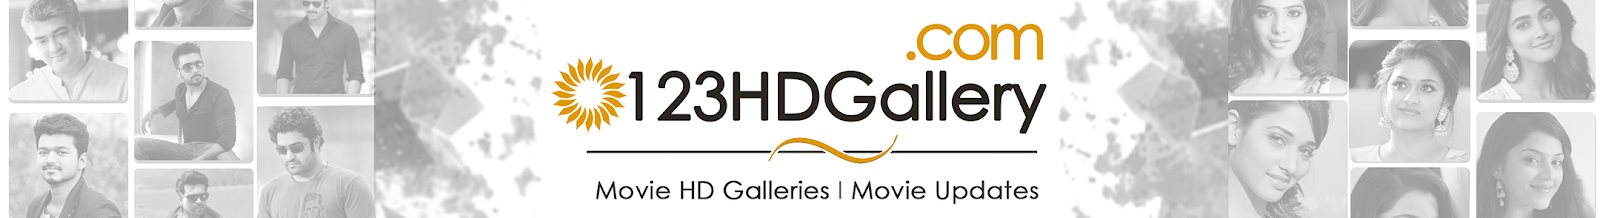 123HDGallery